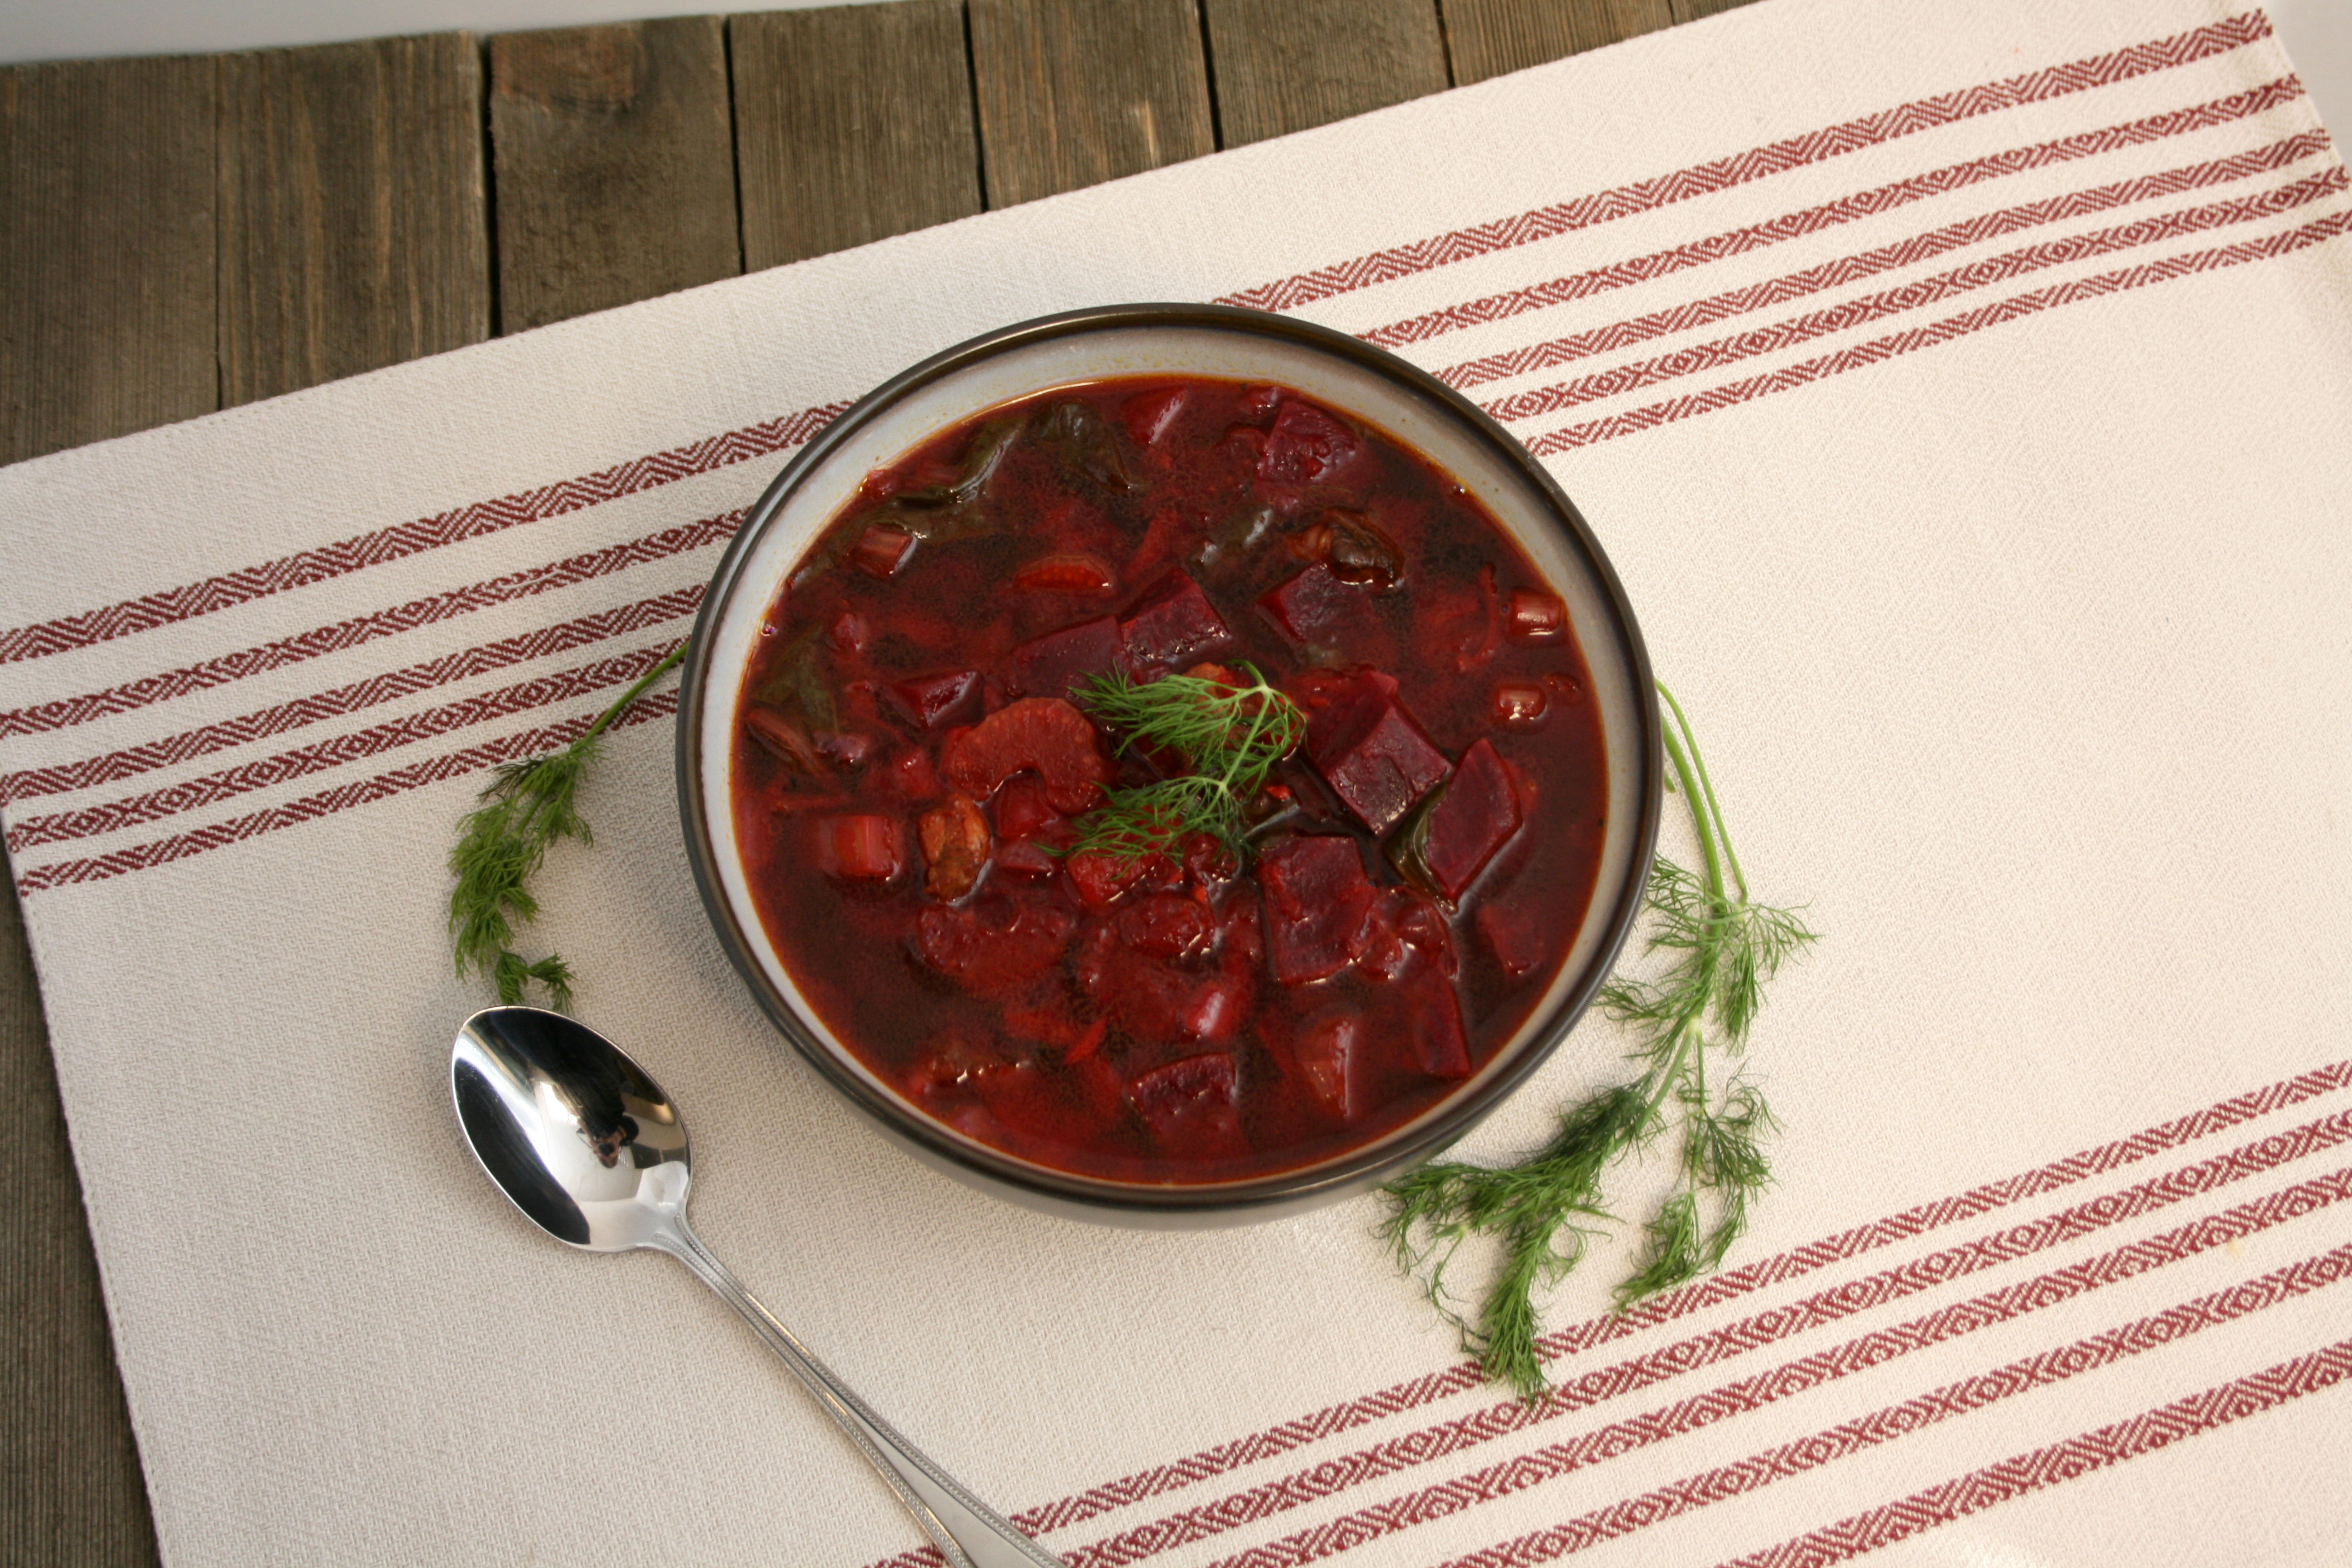 Borscht is a soup that includes beets and other vegetables. (NDSU photo)